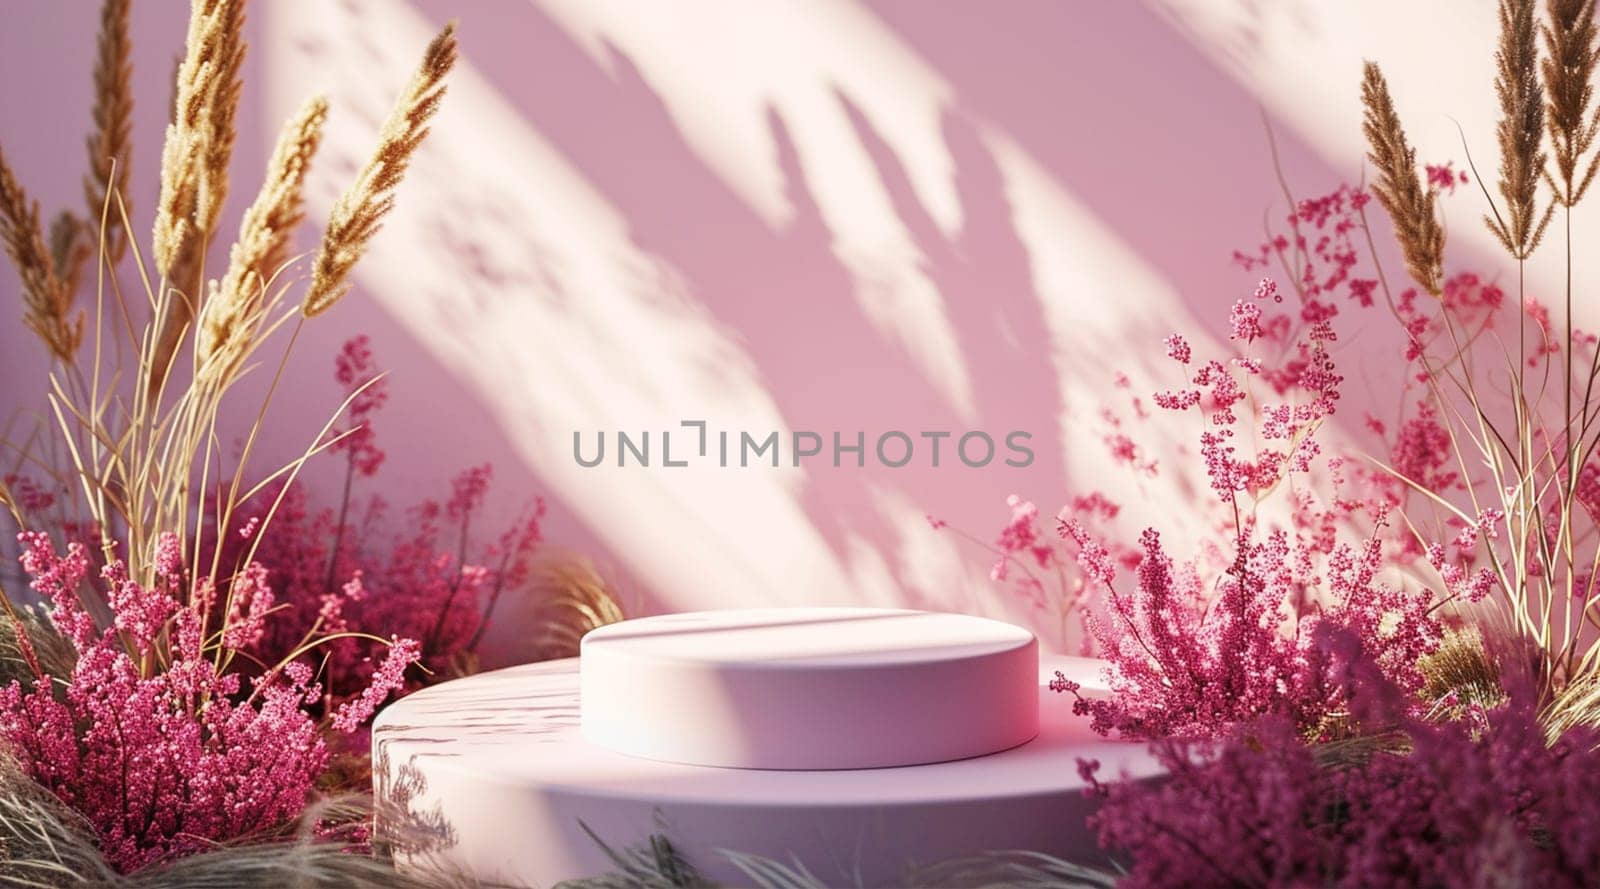 Floral arrangement with shadows on a pink backdrop, creating a serene, monochromatic setting by kizuneko